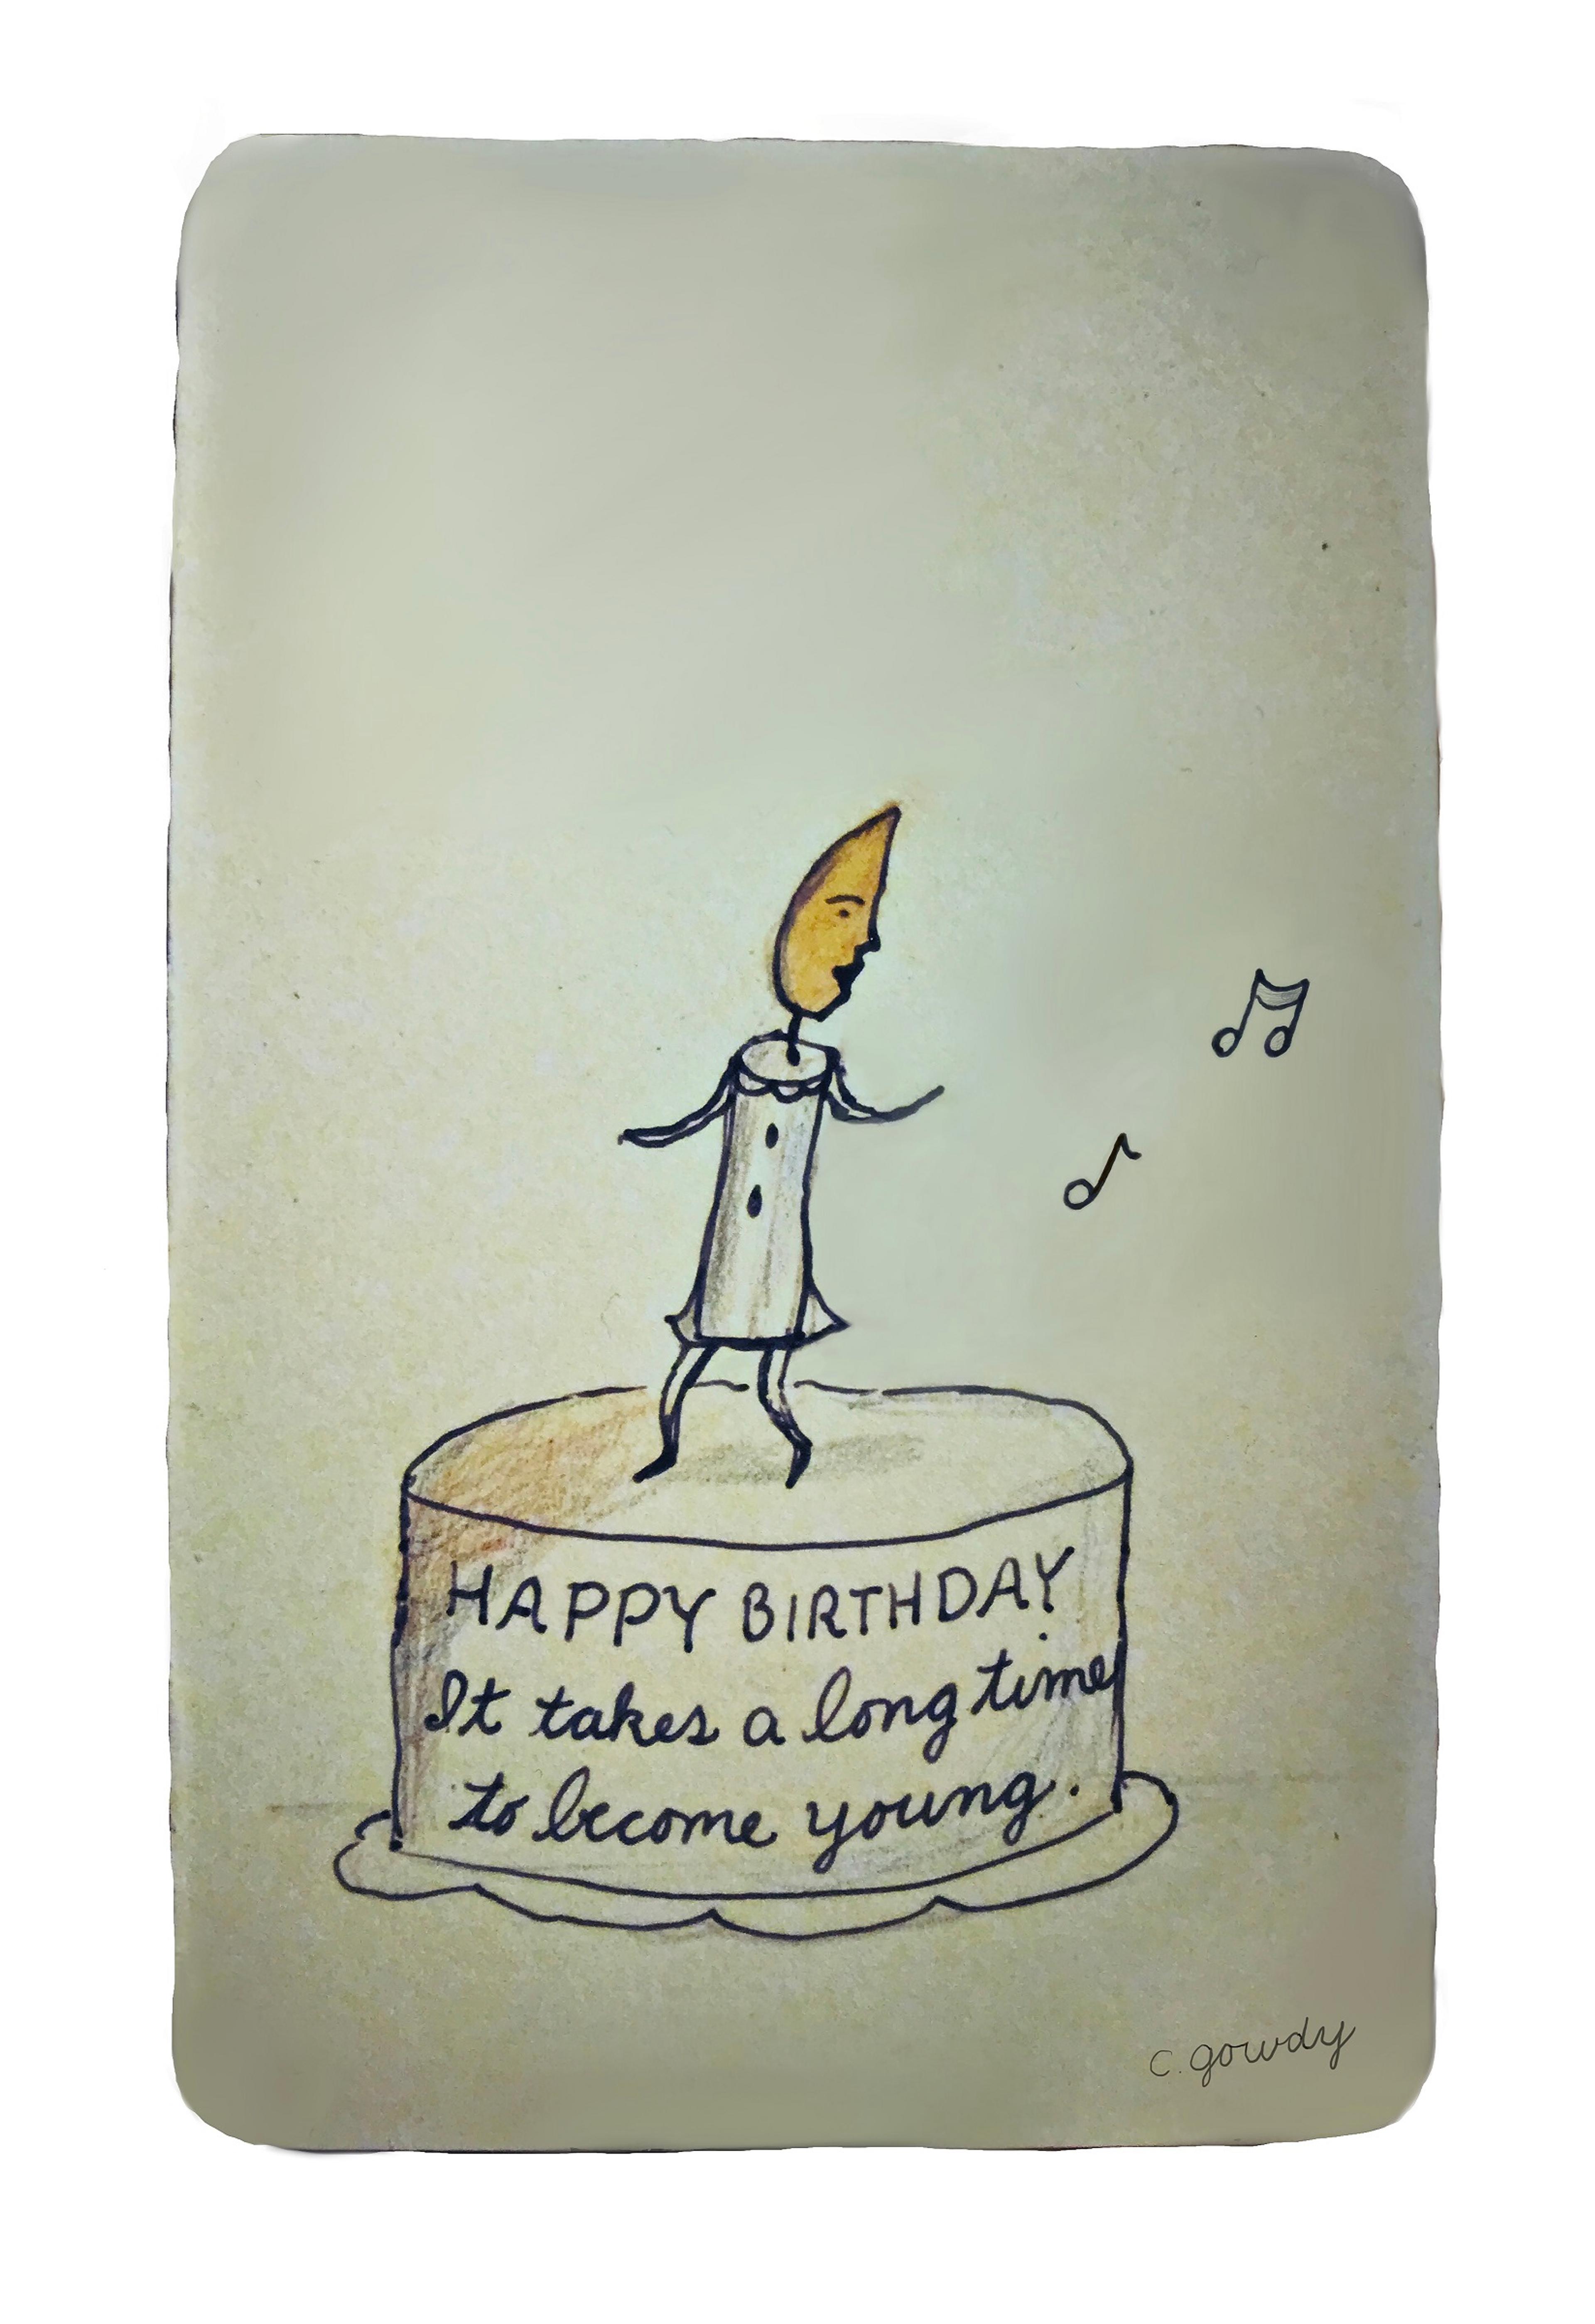 Illustration of a candle singing on top of a birthday cake